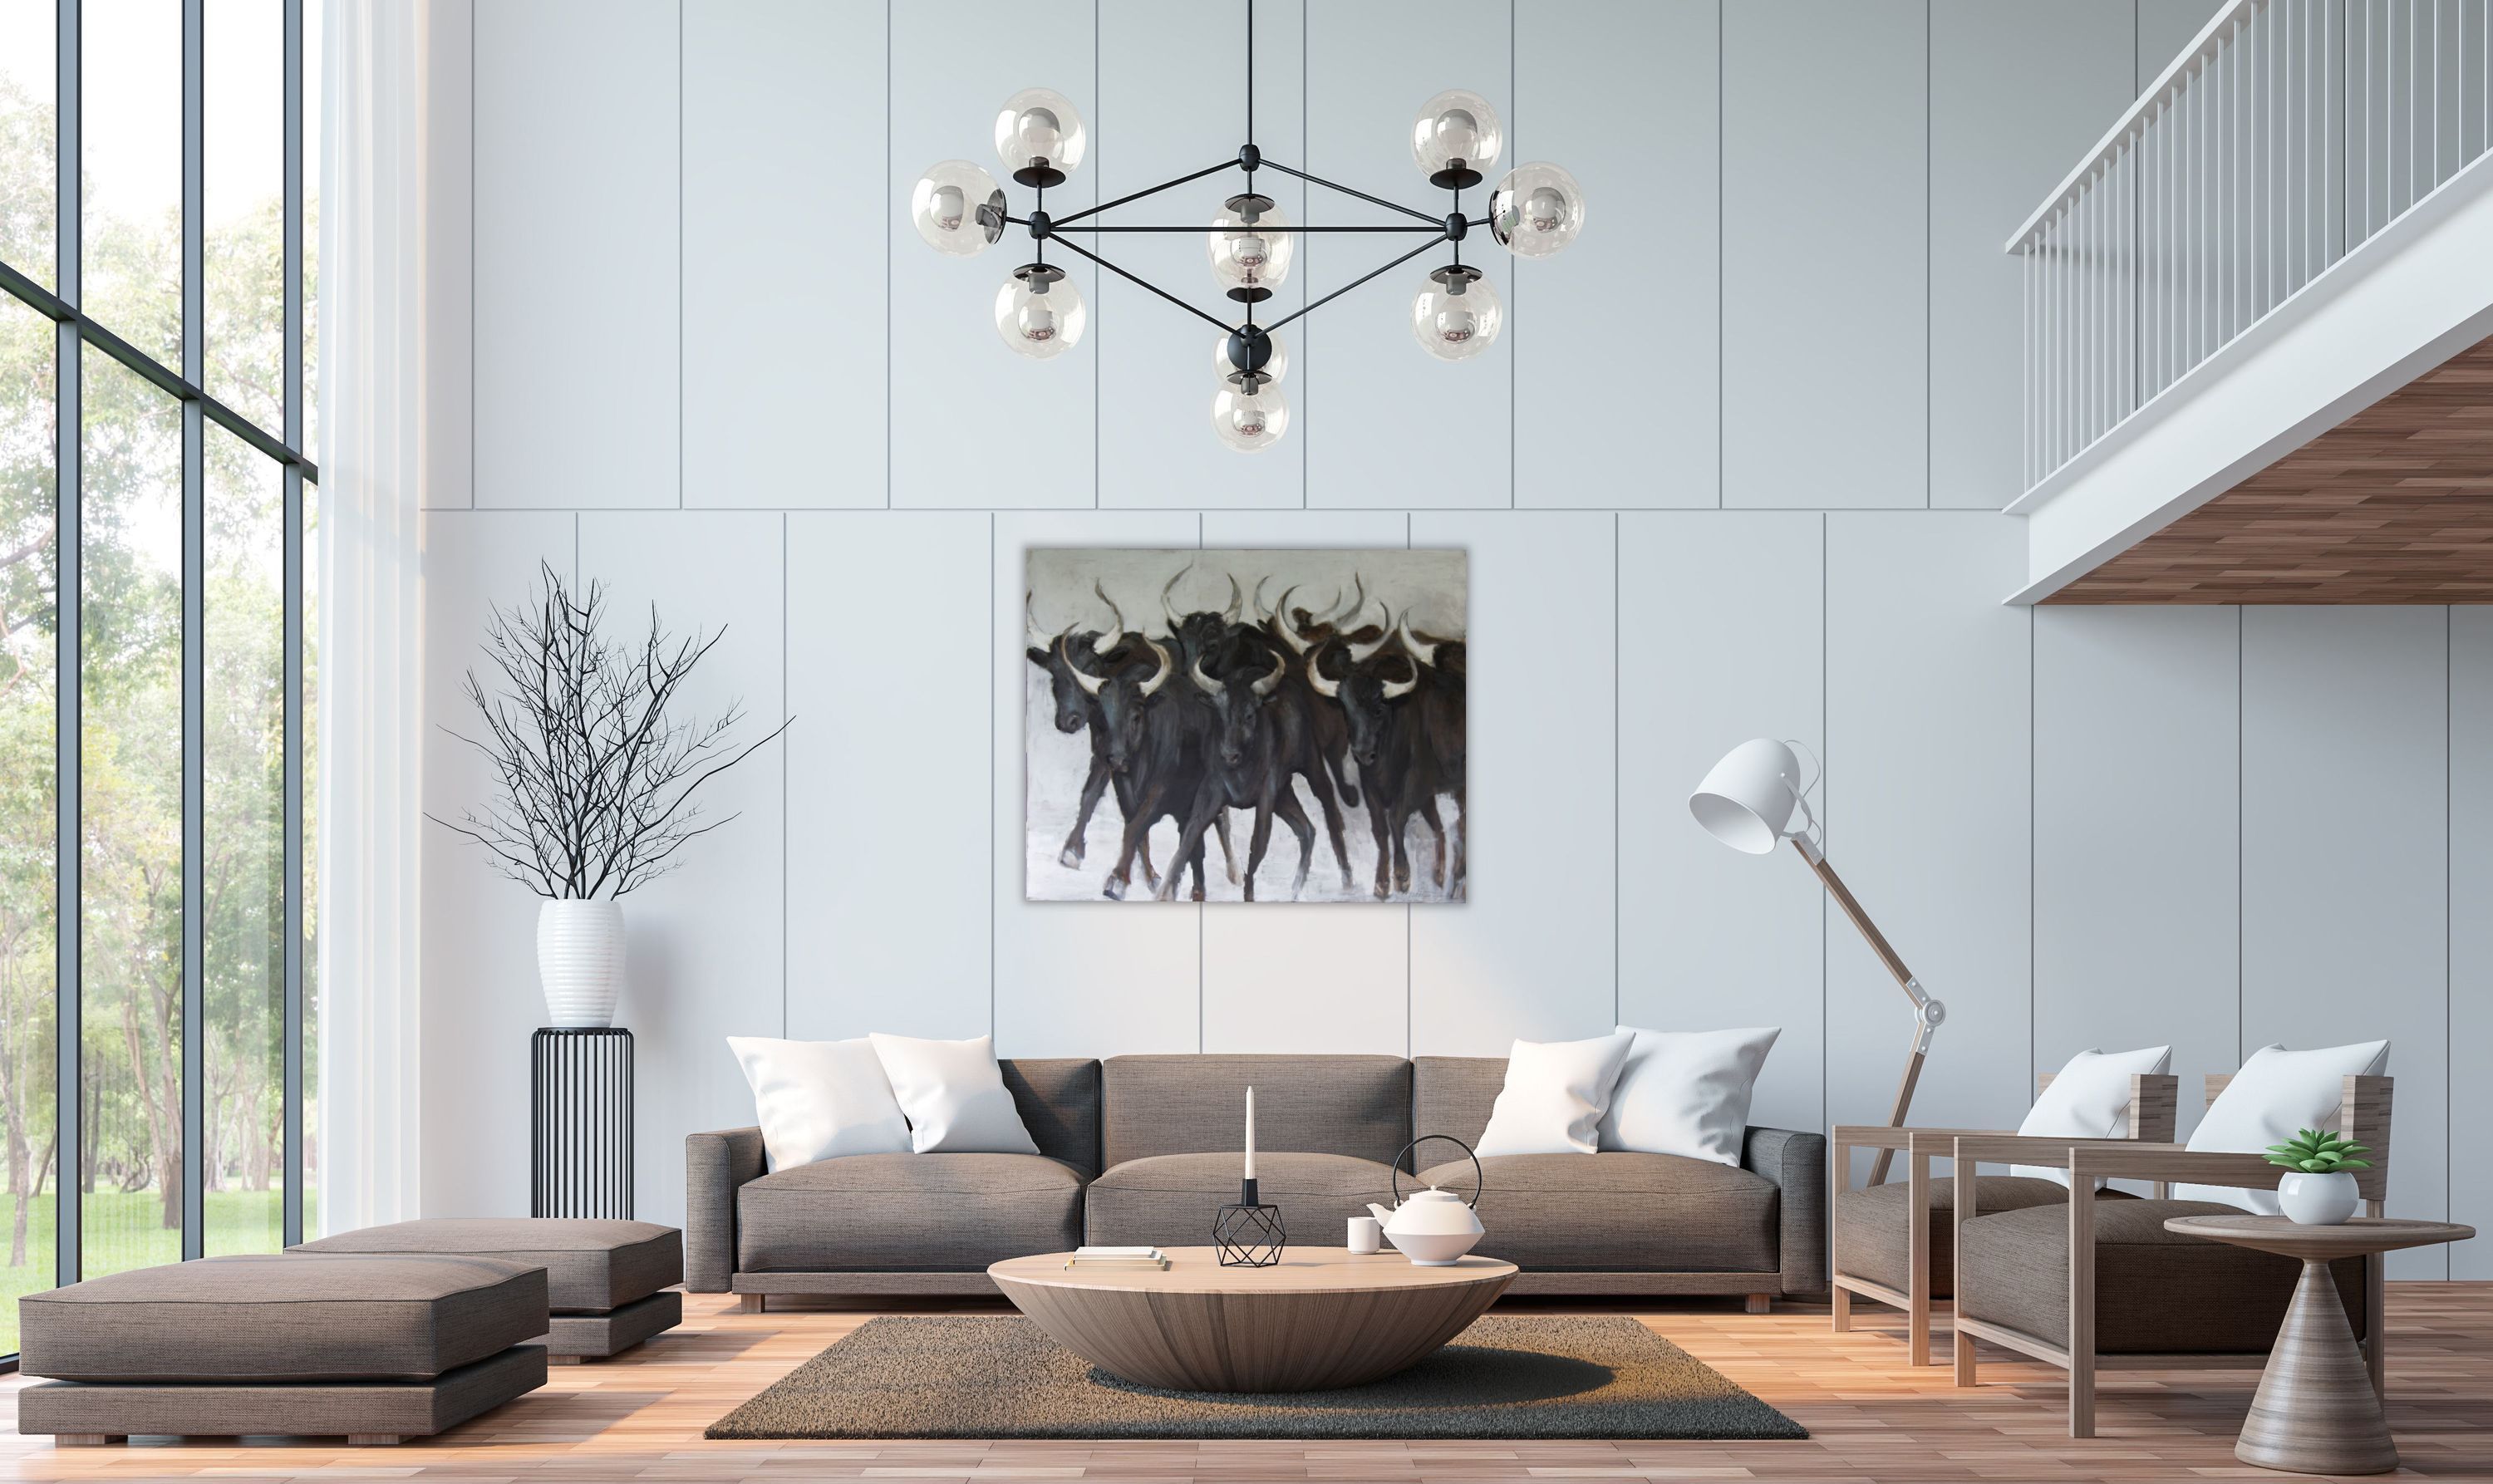 Energetic herd of bulls from the Camargue region of France. A showpiece for any wall in your home or office.